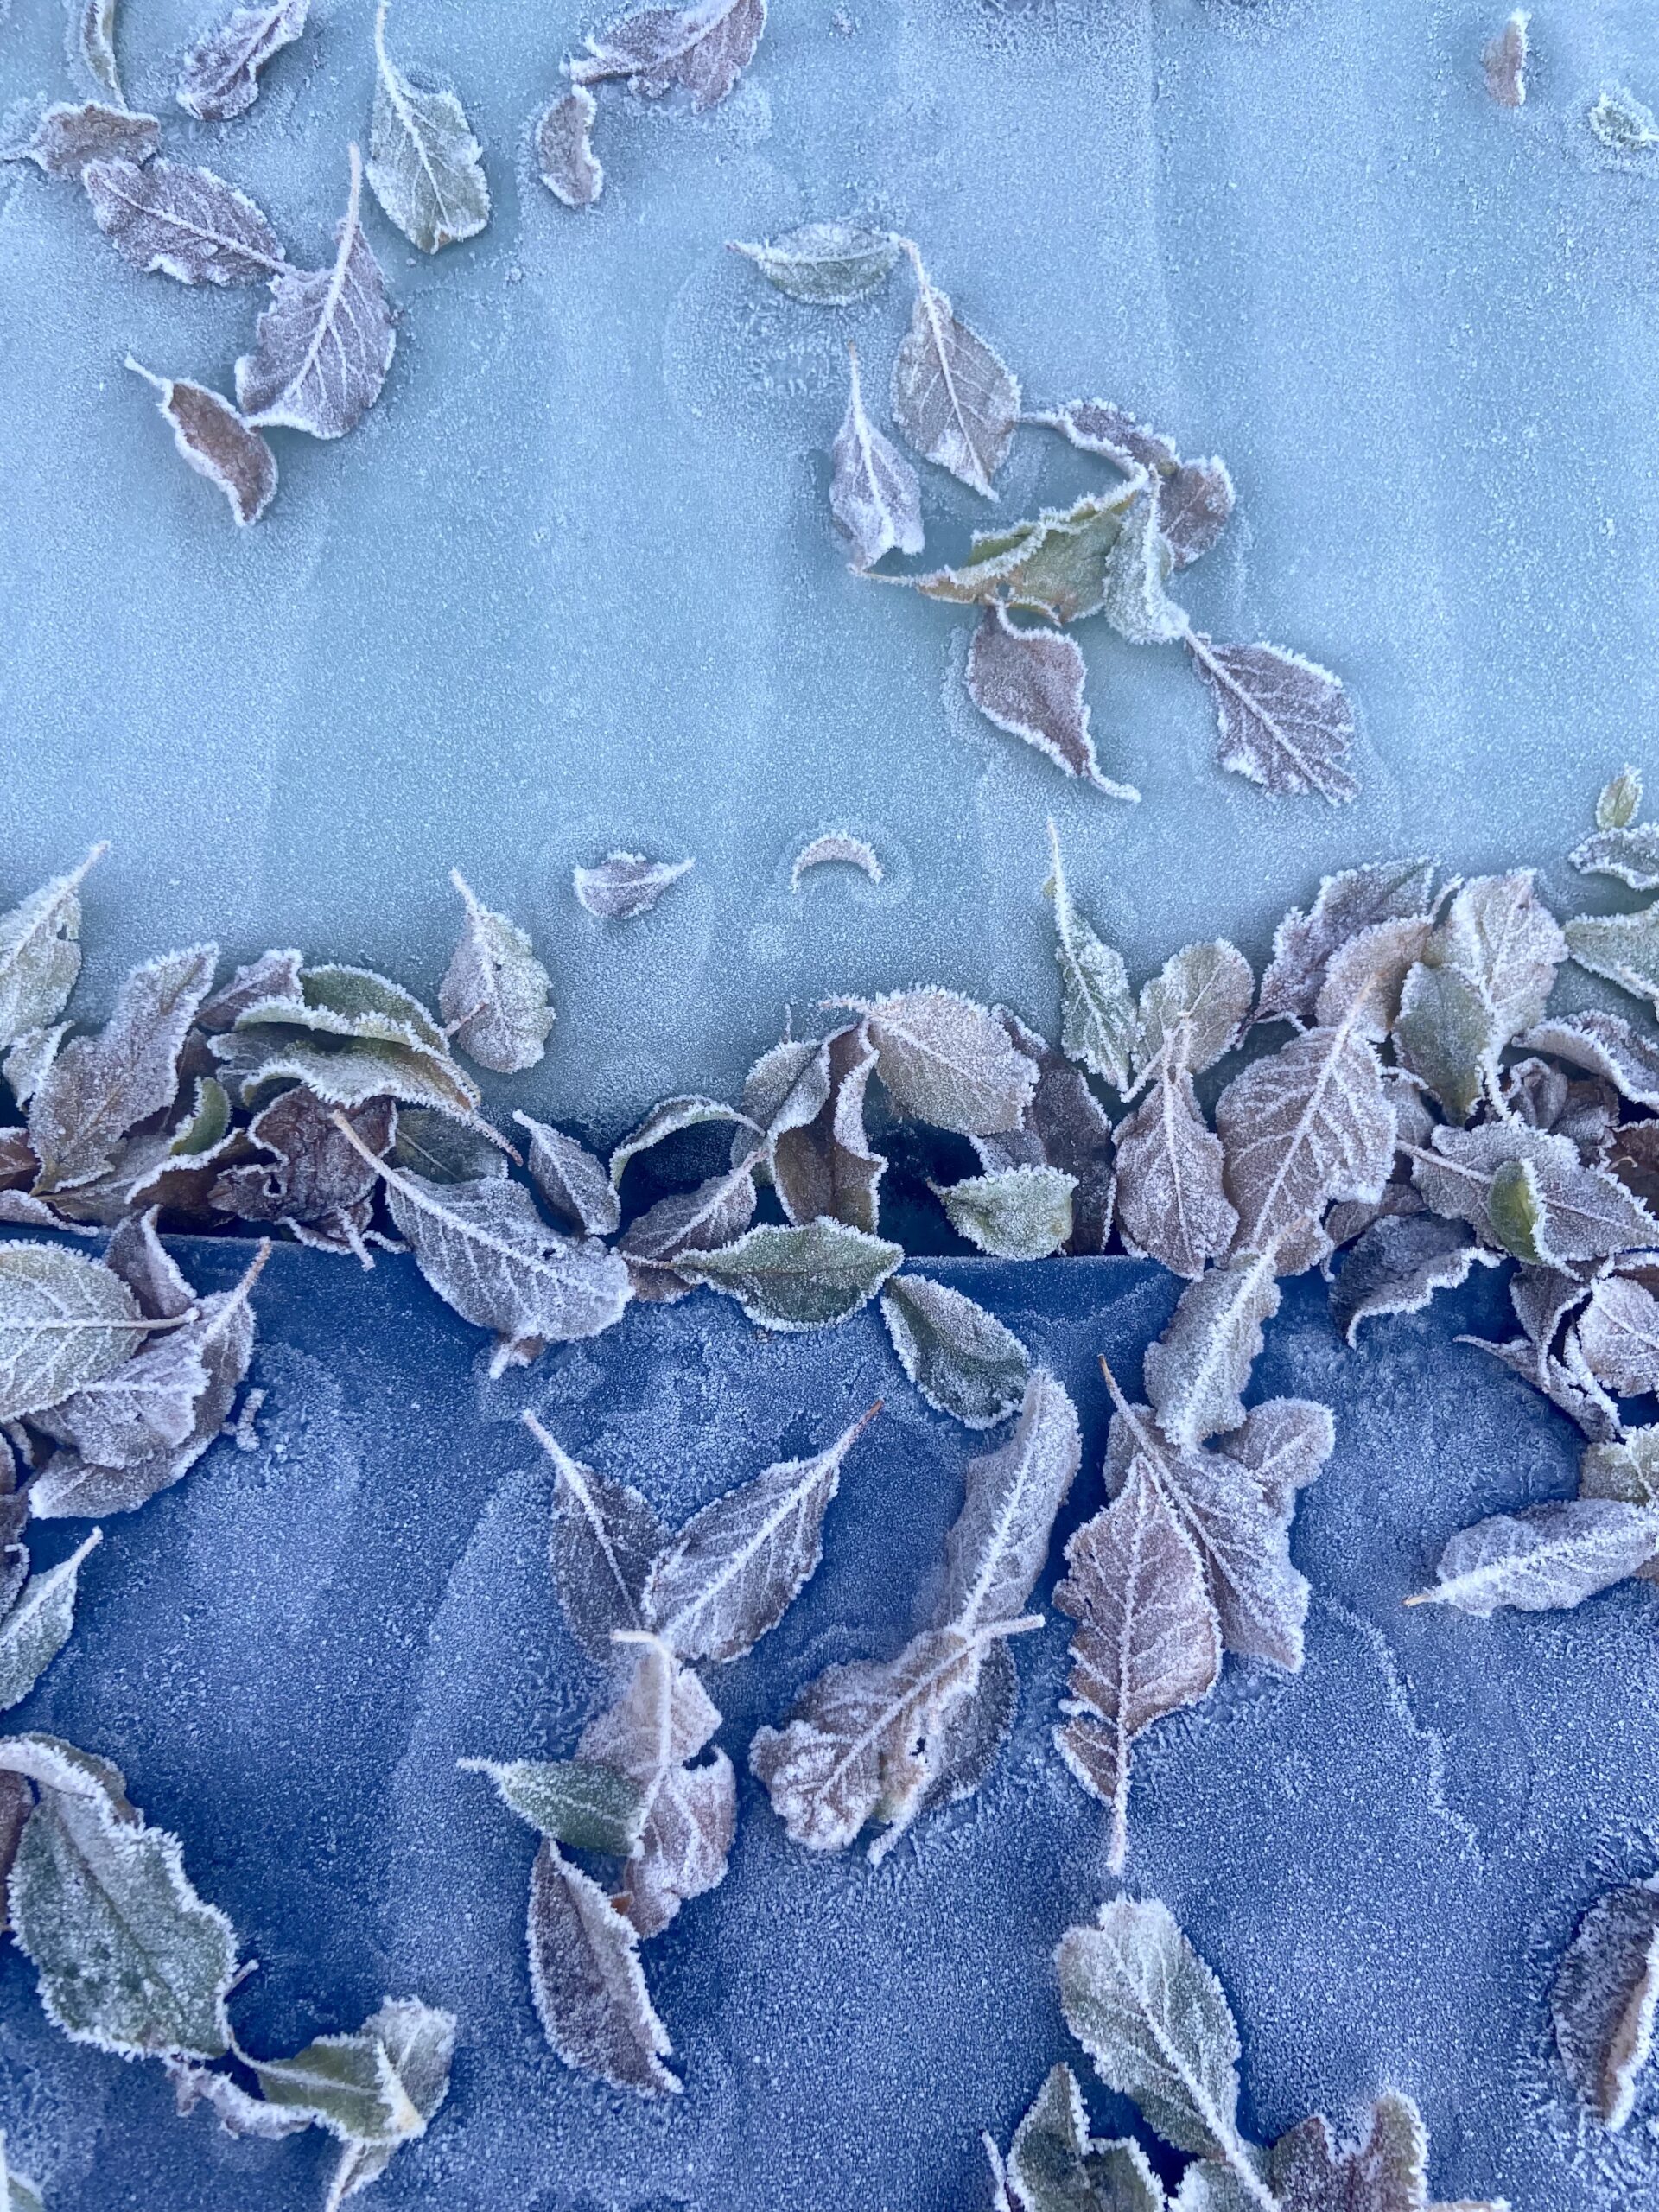 Interesting effect of leaves frozen onto a car window taken with iphone